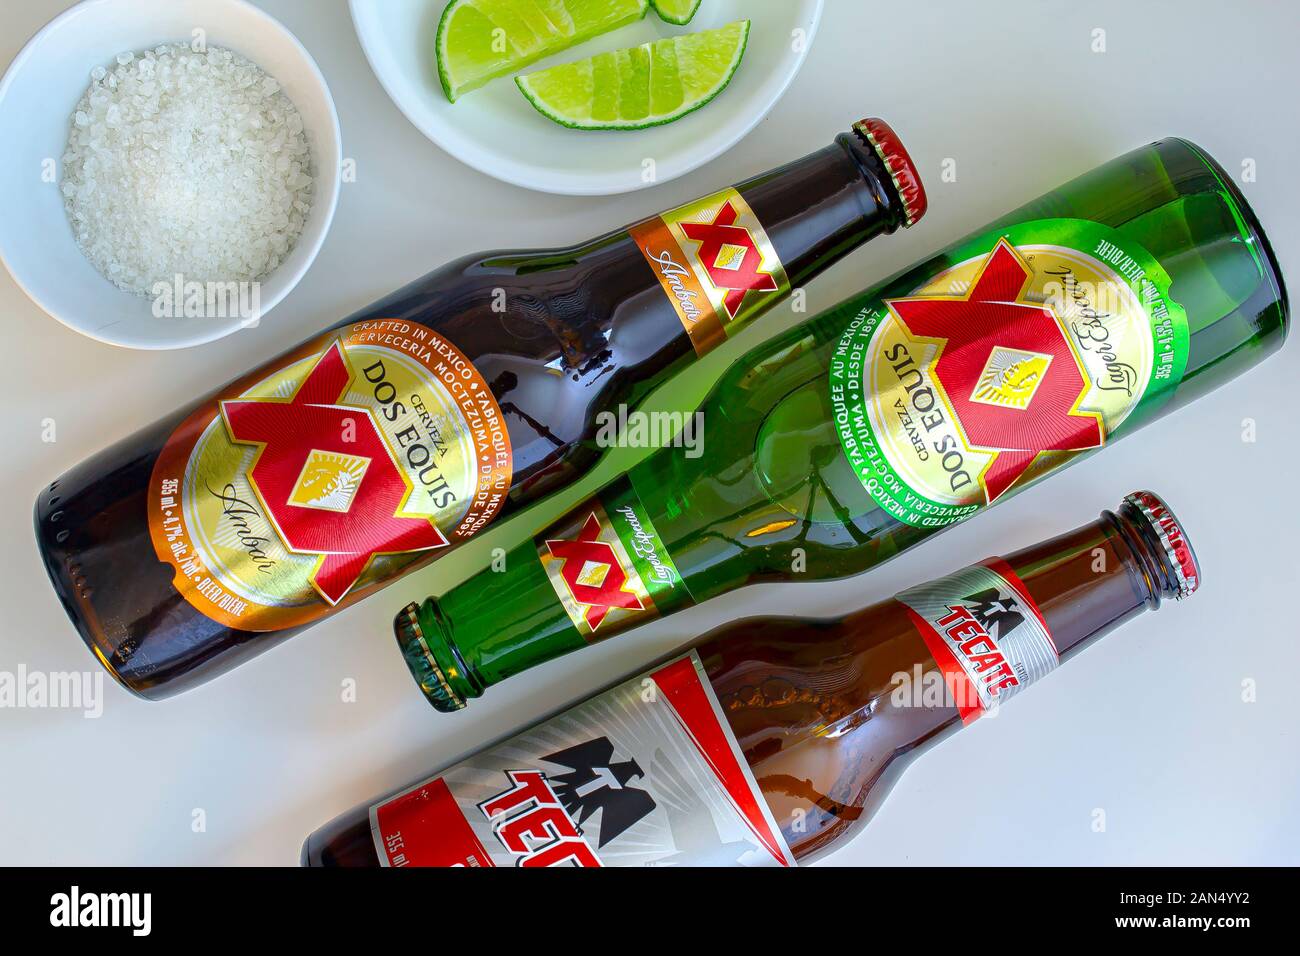 Bottles of Mexican pale and dark lager beers call: Tecate and Dos Equis on a white table with limes and salt on the side Stock Photo